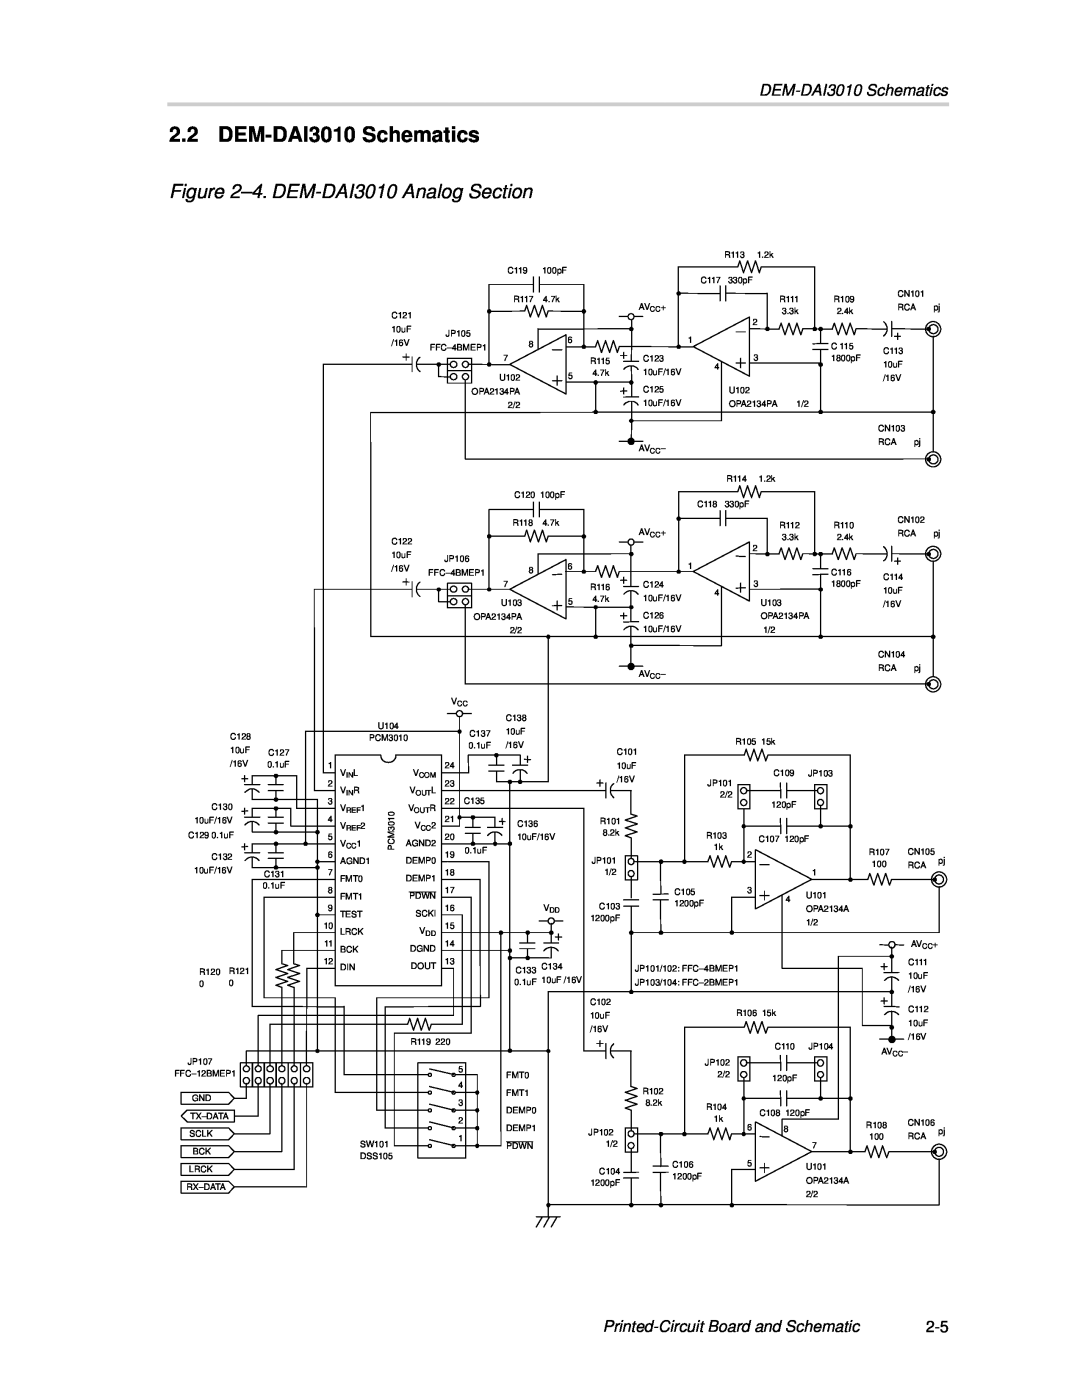 Texas Instruments manual DEM-DAI3010Schematics, 4. DEM-DAI3010Analog Section, Printed-CircuitBoard and Schematic 